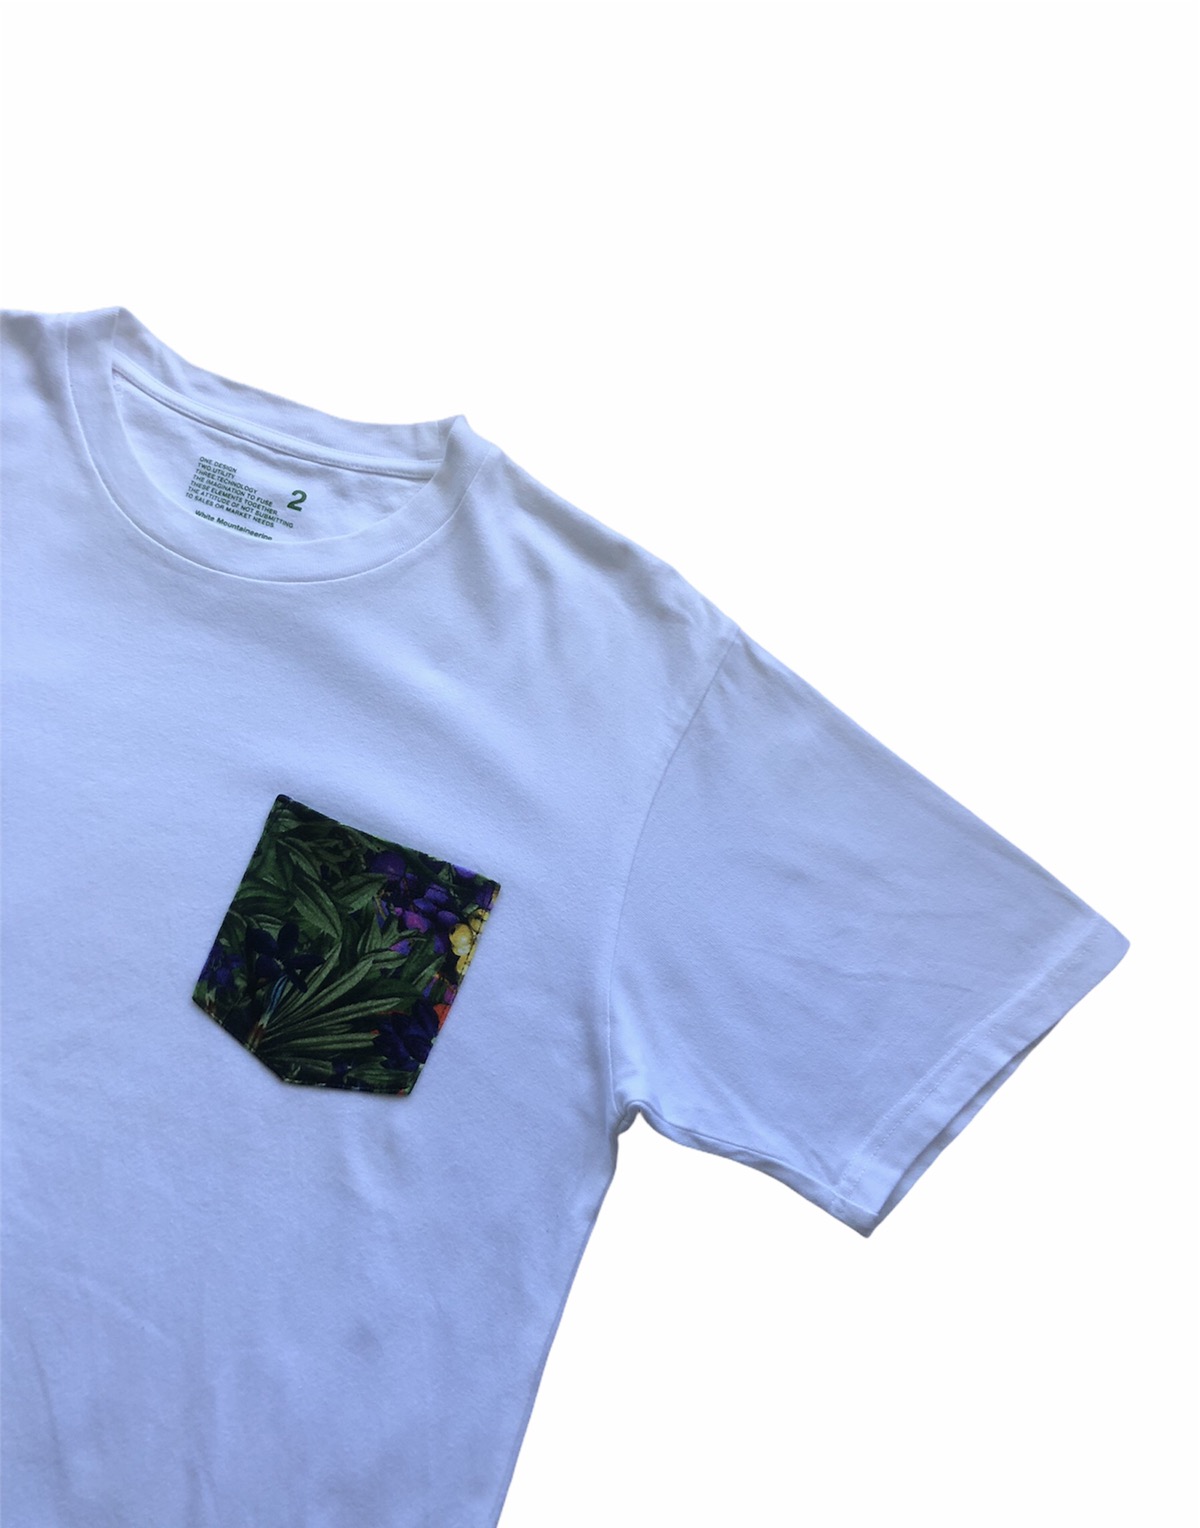 Attached Fabric Floral motif Pocket t shirt - 4